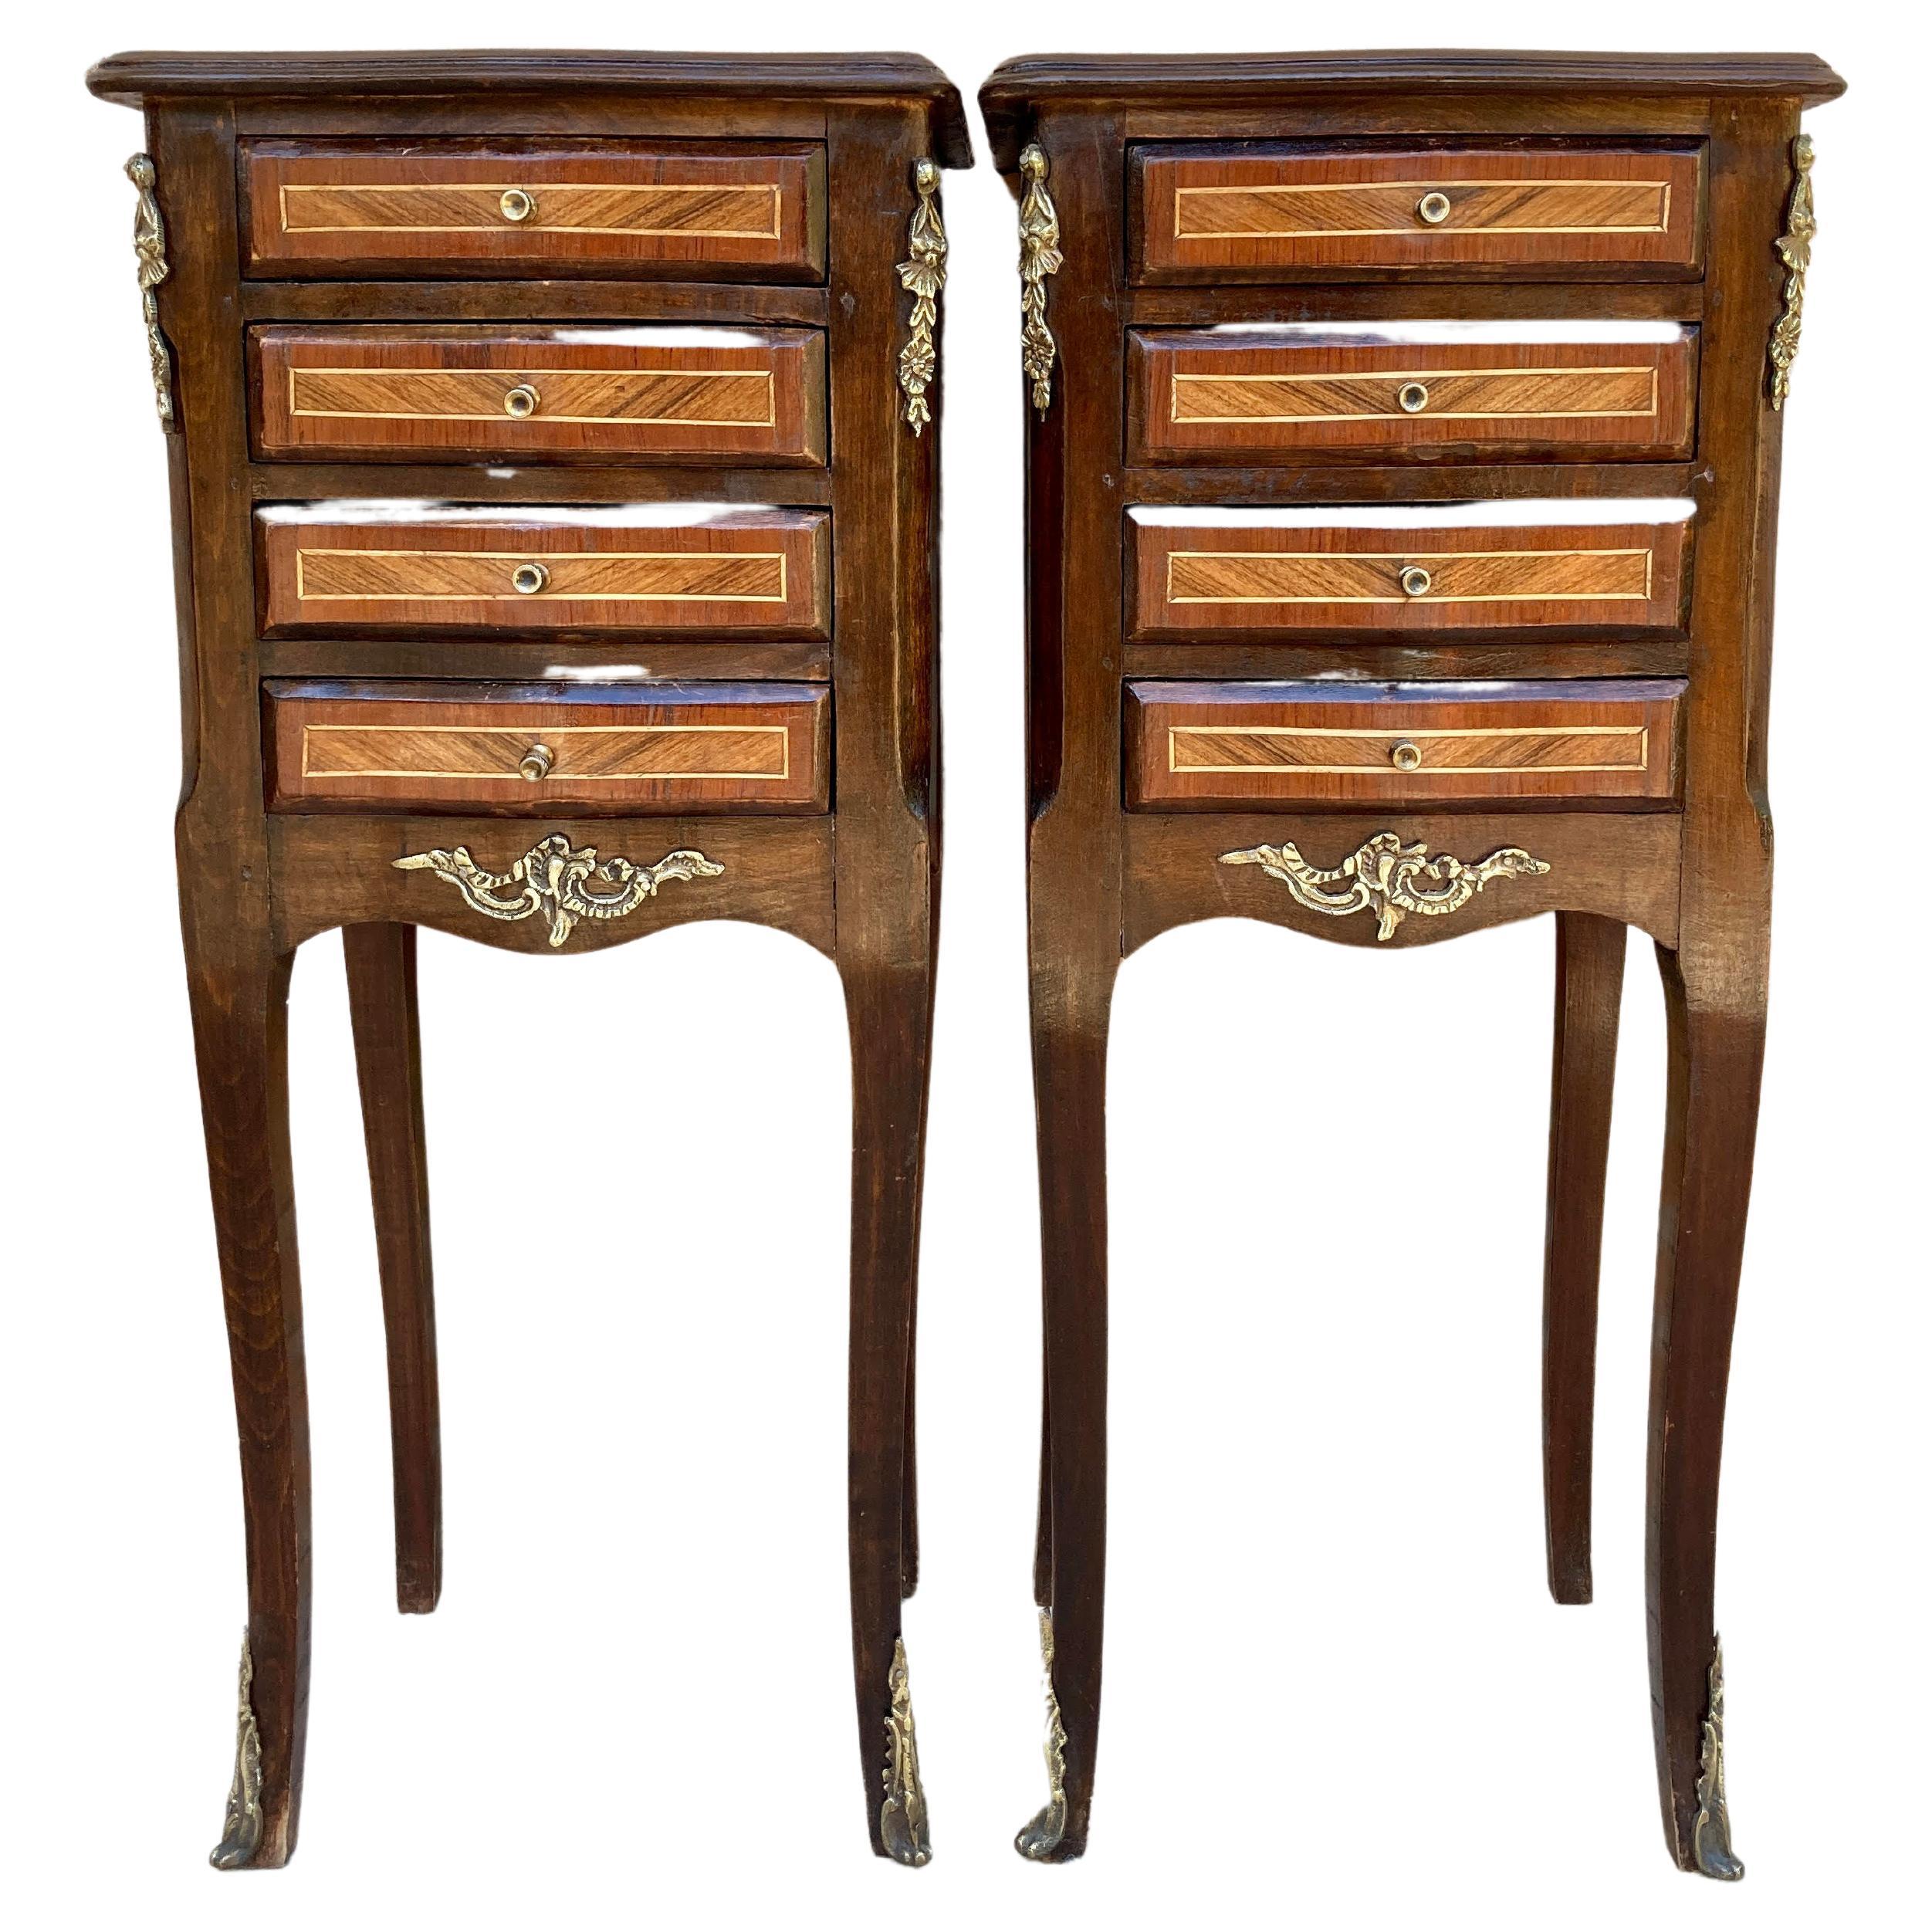 Pair of French Louis XV Style Tulipwood Veneer Bedside Tables or Nightstands For Sale